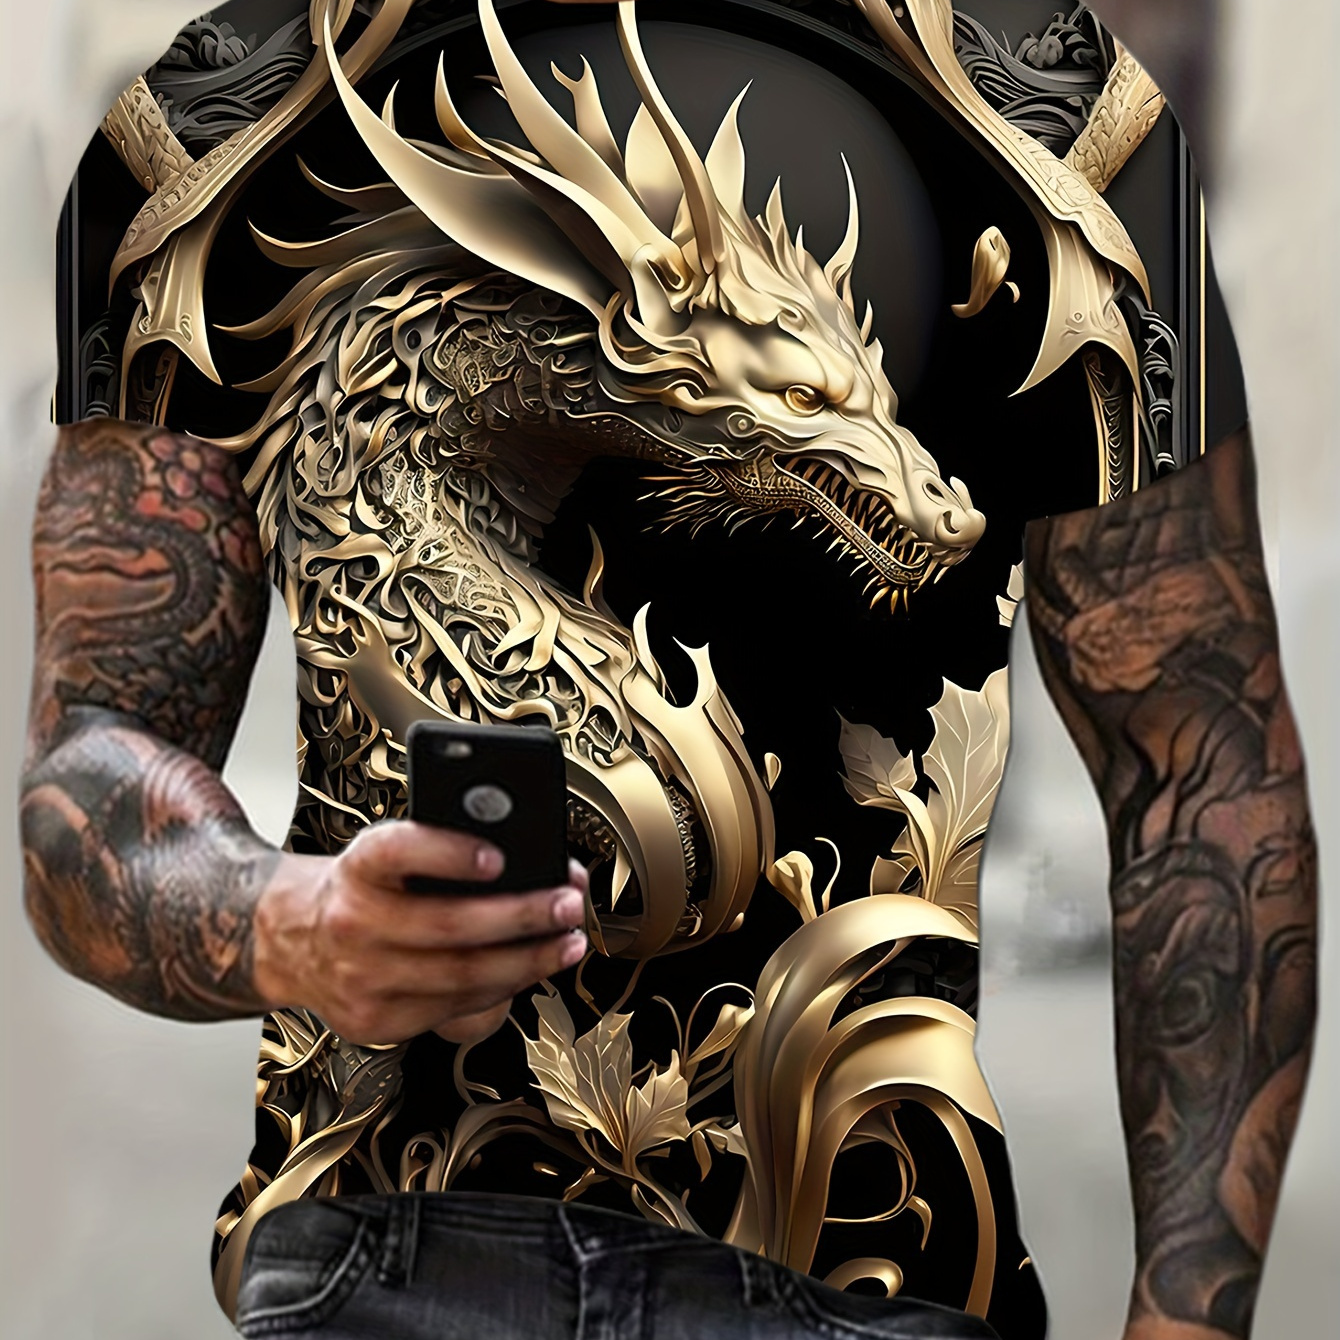 

Novelty Dragon Pattern 3d Printed Crew Neck Short Sleeve T-shirt For Men, Casual Summer T-shirt For Daily Wear And Vacation Resorts